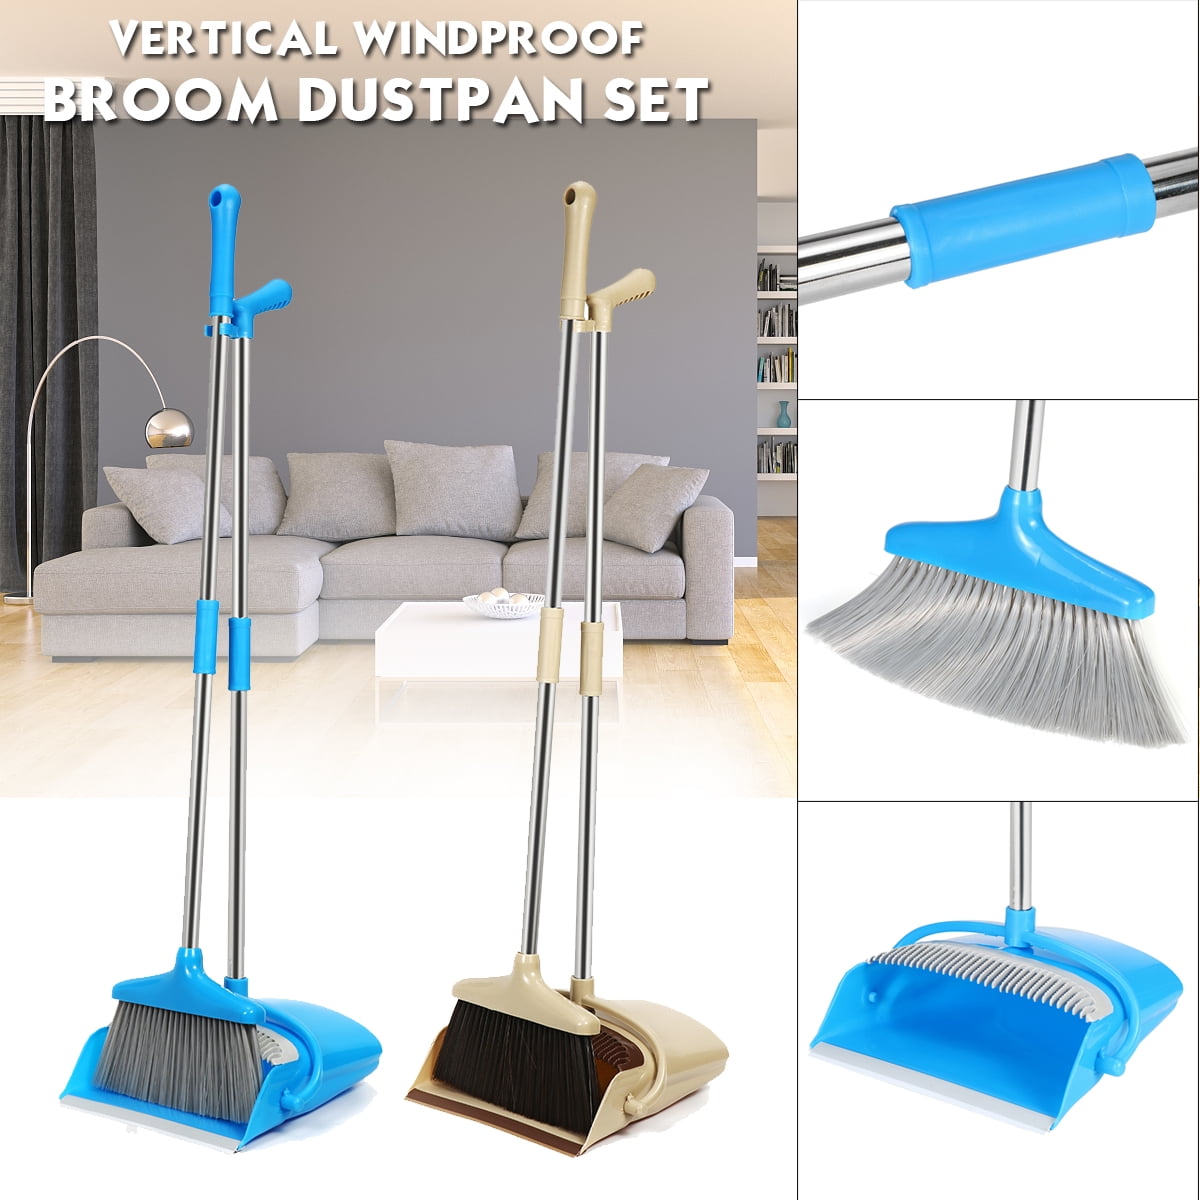 Broom and Dustpan Set Cleaning Supplies Upright Stainless Steel Rod Non-stick Hair Soft Brush Broom And Dustpan Extra Long Handle Rotatable Broom Set Home Kitchen Office Toilet Cleaning T